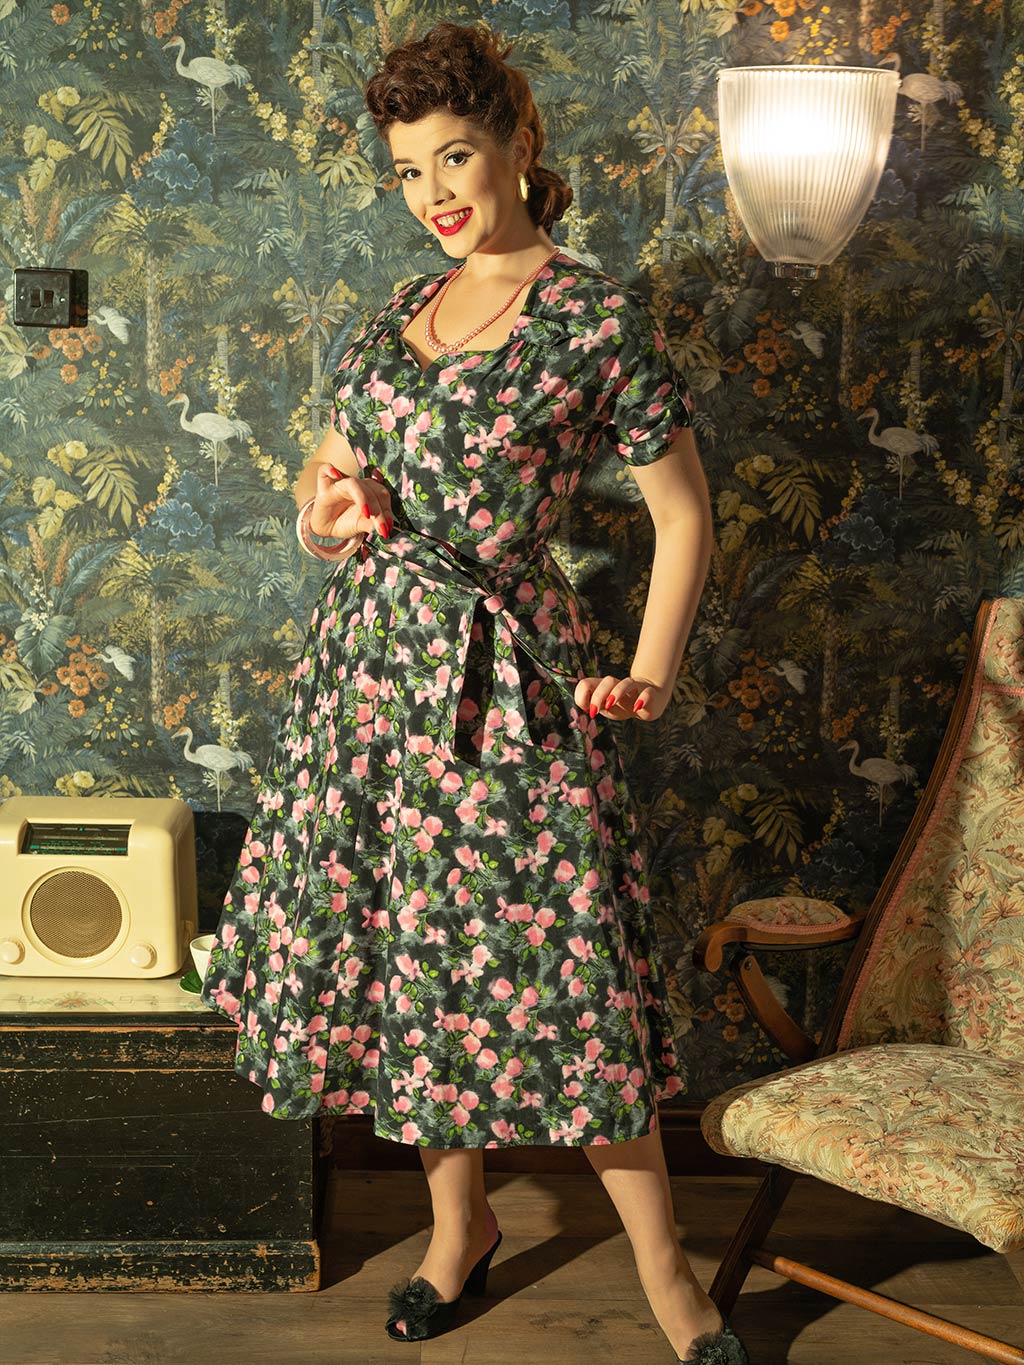 dress from the 40s